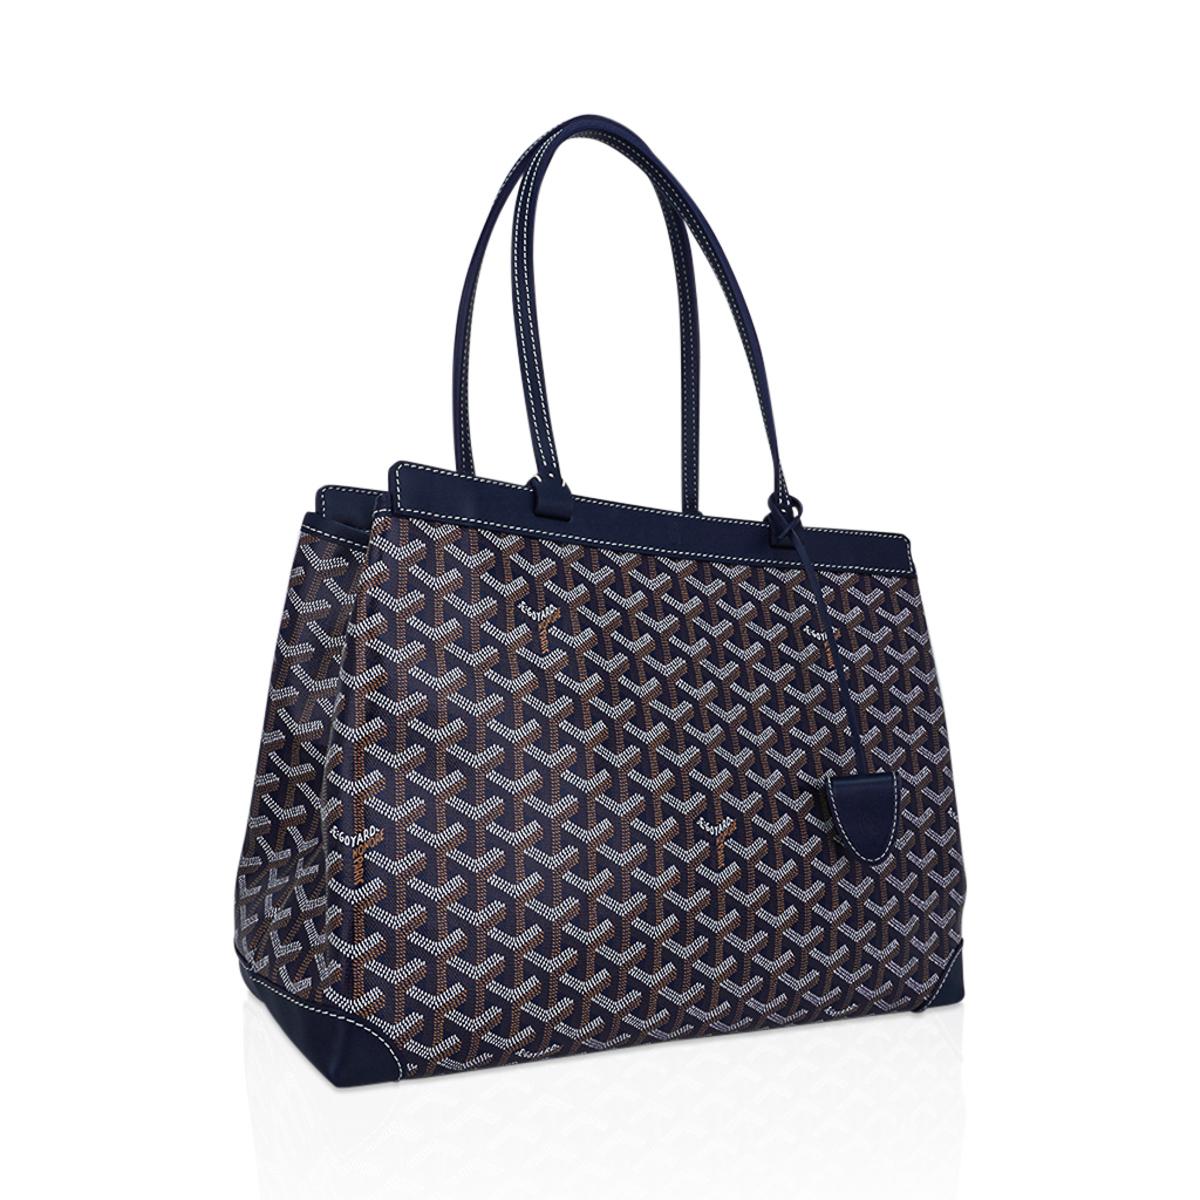 Mightychic offers a Goyard Bellechasse Biaude Navy Blue tote bag.
A perfect tote for fun and work!
Classic signature chevron print and calfskin leather.
Croc clasp keeps tote secure and closed.
One inside pocket and biaude cover to protect contents